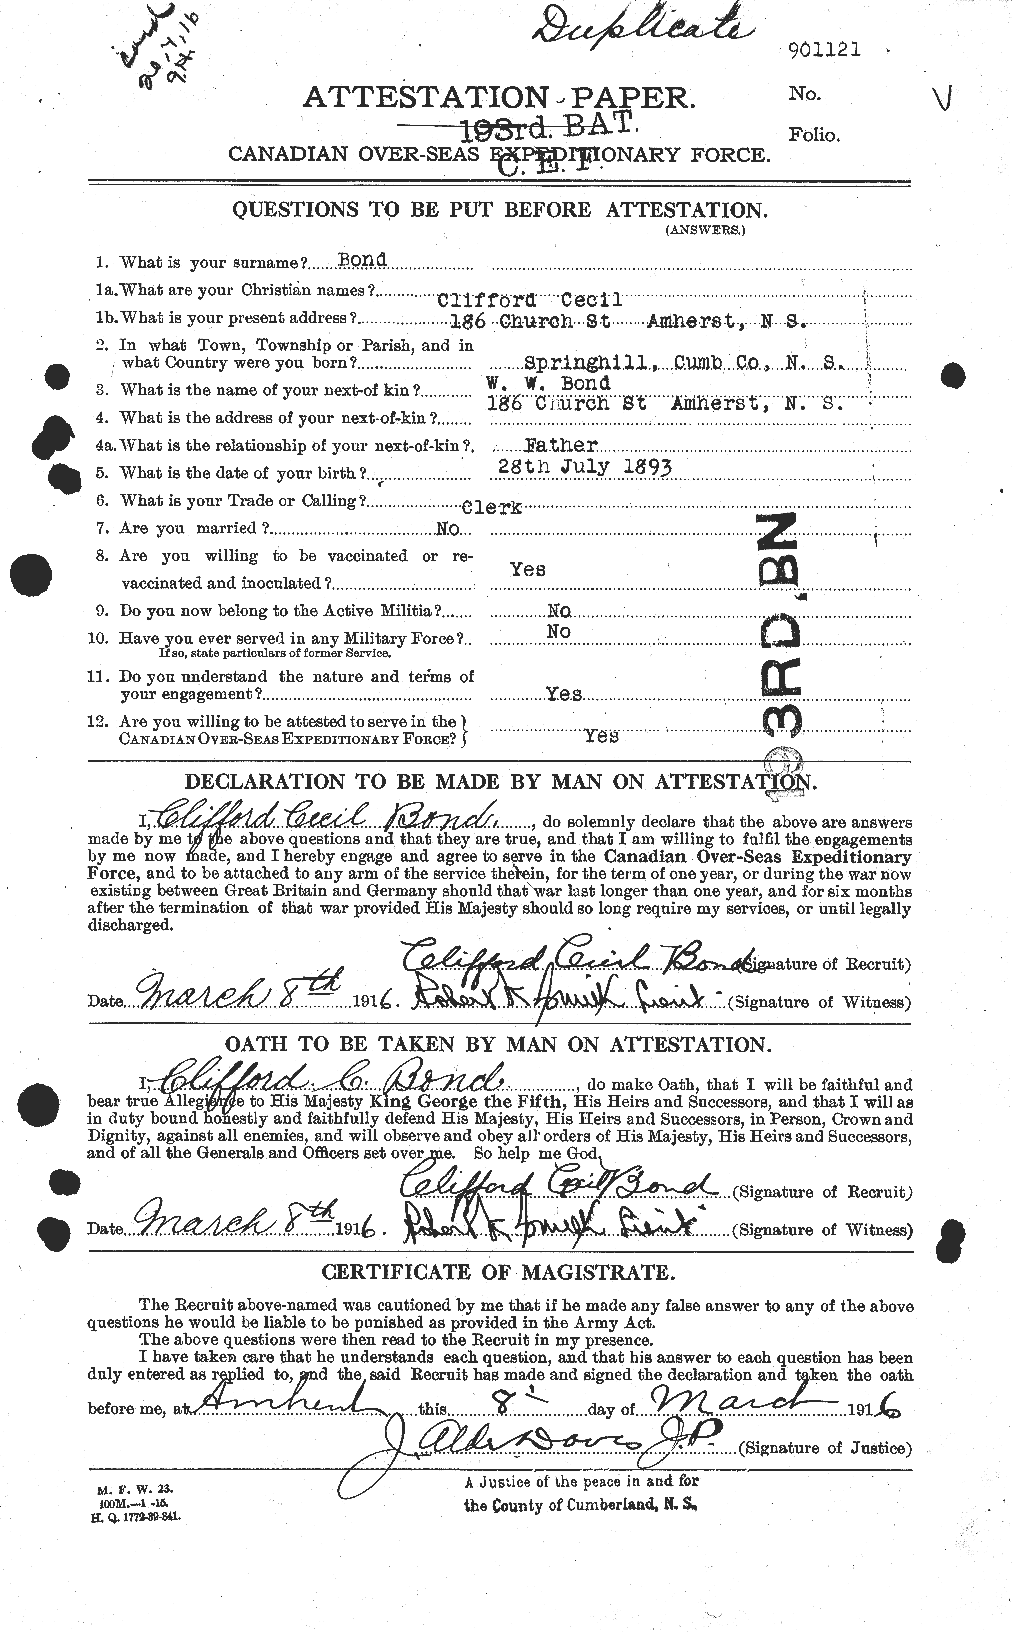 Personnel Records of the First World War - CEF 250270a